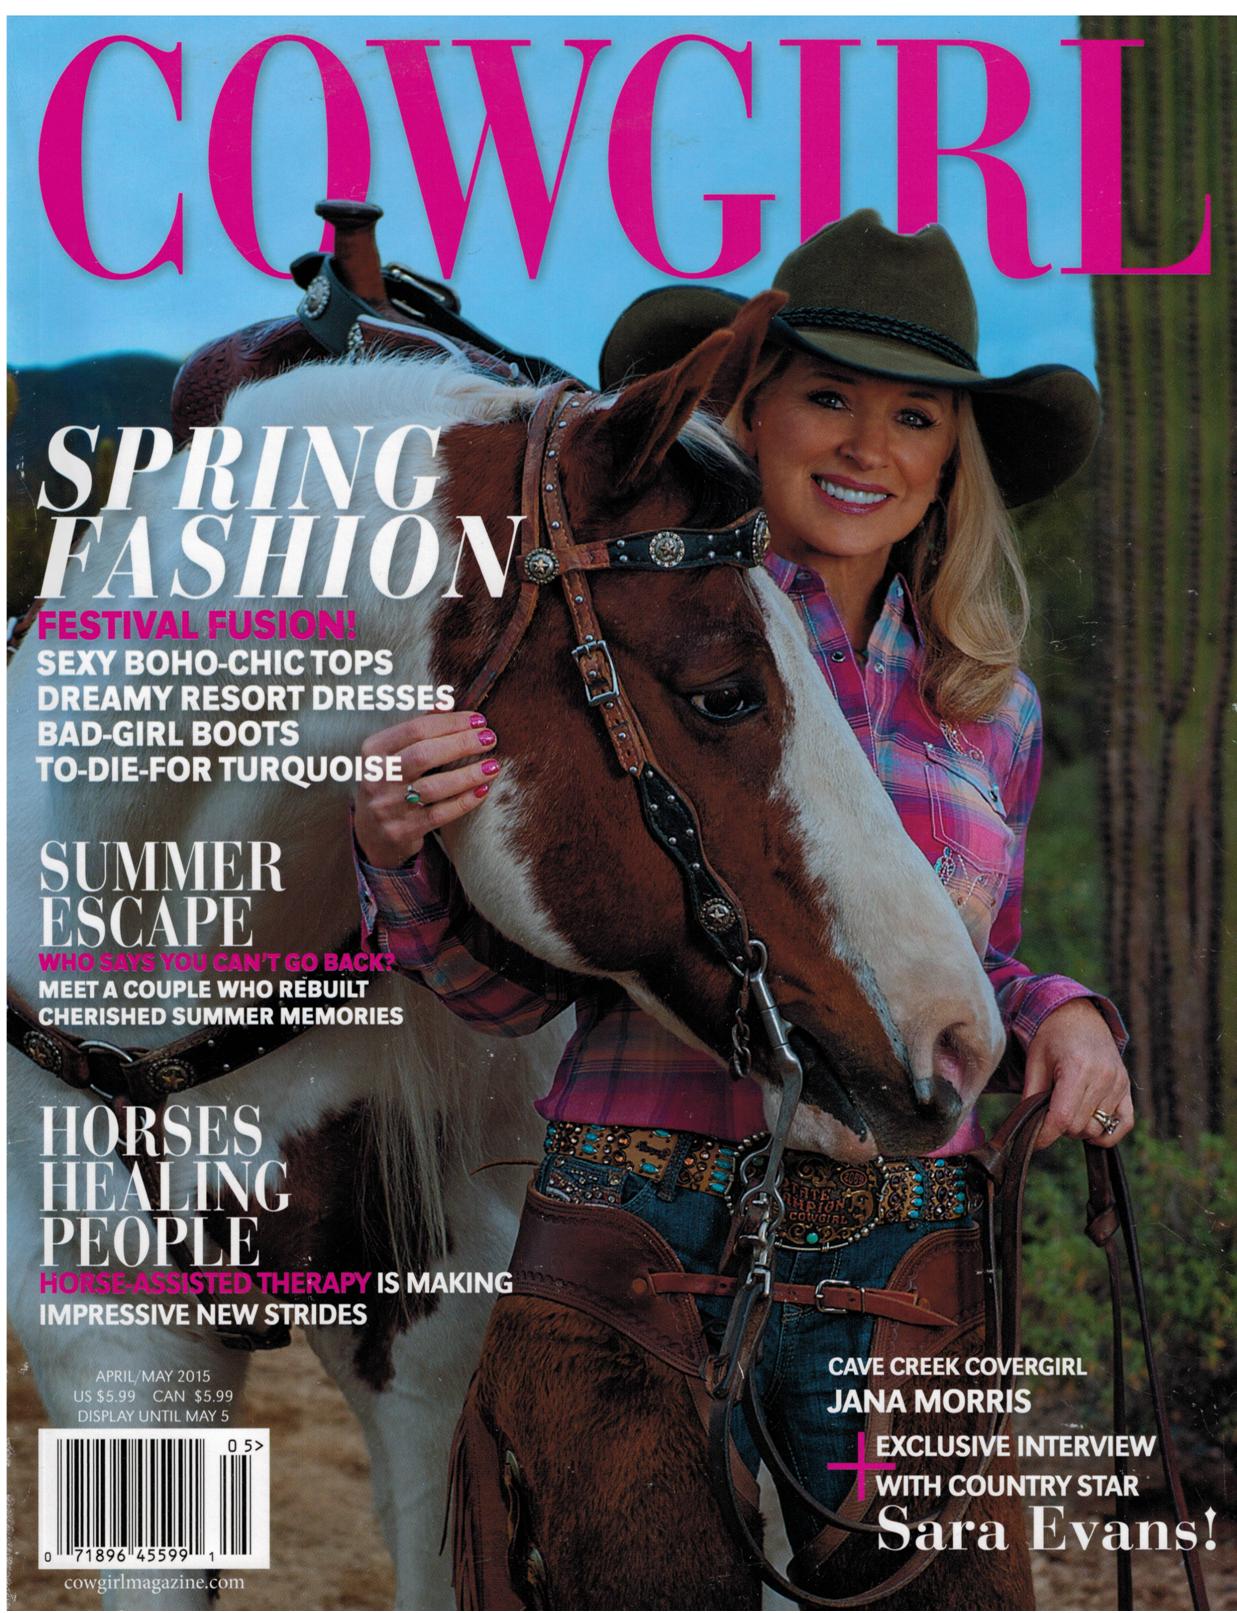 14 Cowgirl Magazine - April-May 2015.jpg